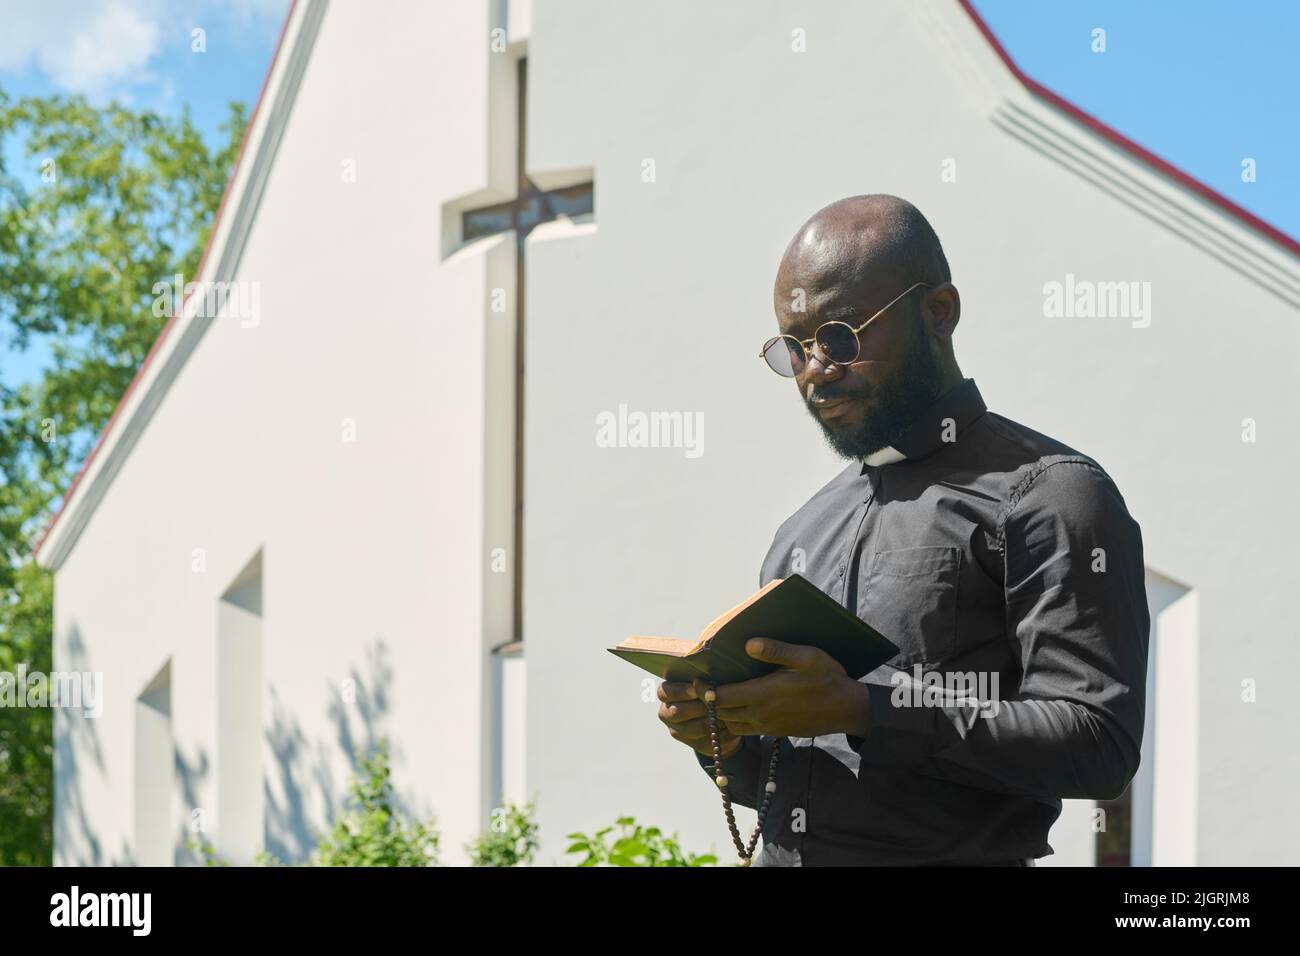 Young serious black man in shirt with clerical collar and eyeglasses reading Holy Bible while praying or preaching by church building Stock Photo